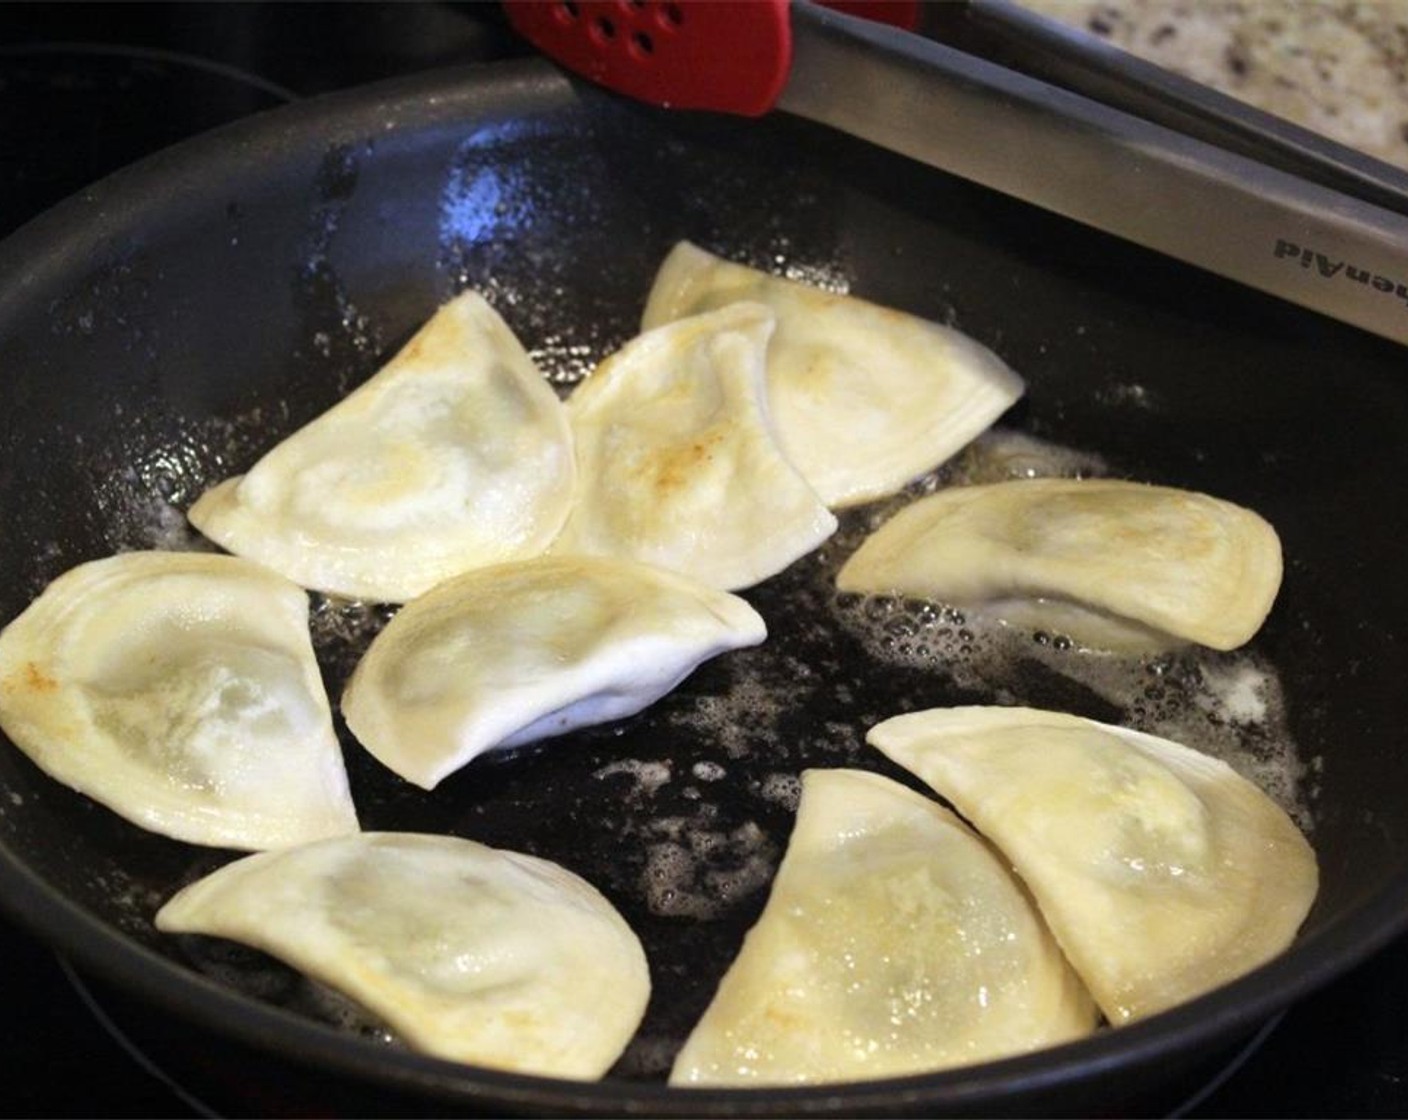 step 3 Cook the pierogi cook for about 10 minutes, during which time you'll prep the other ingredients. Flip the pierogi every 3 minutes or so - see the nice little brown color?